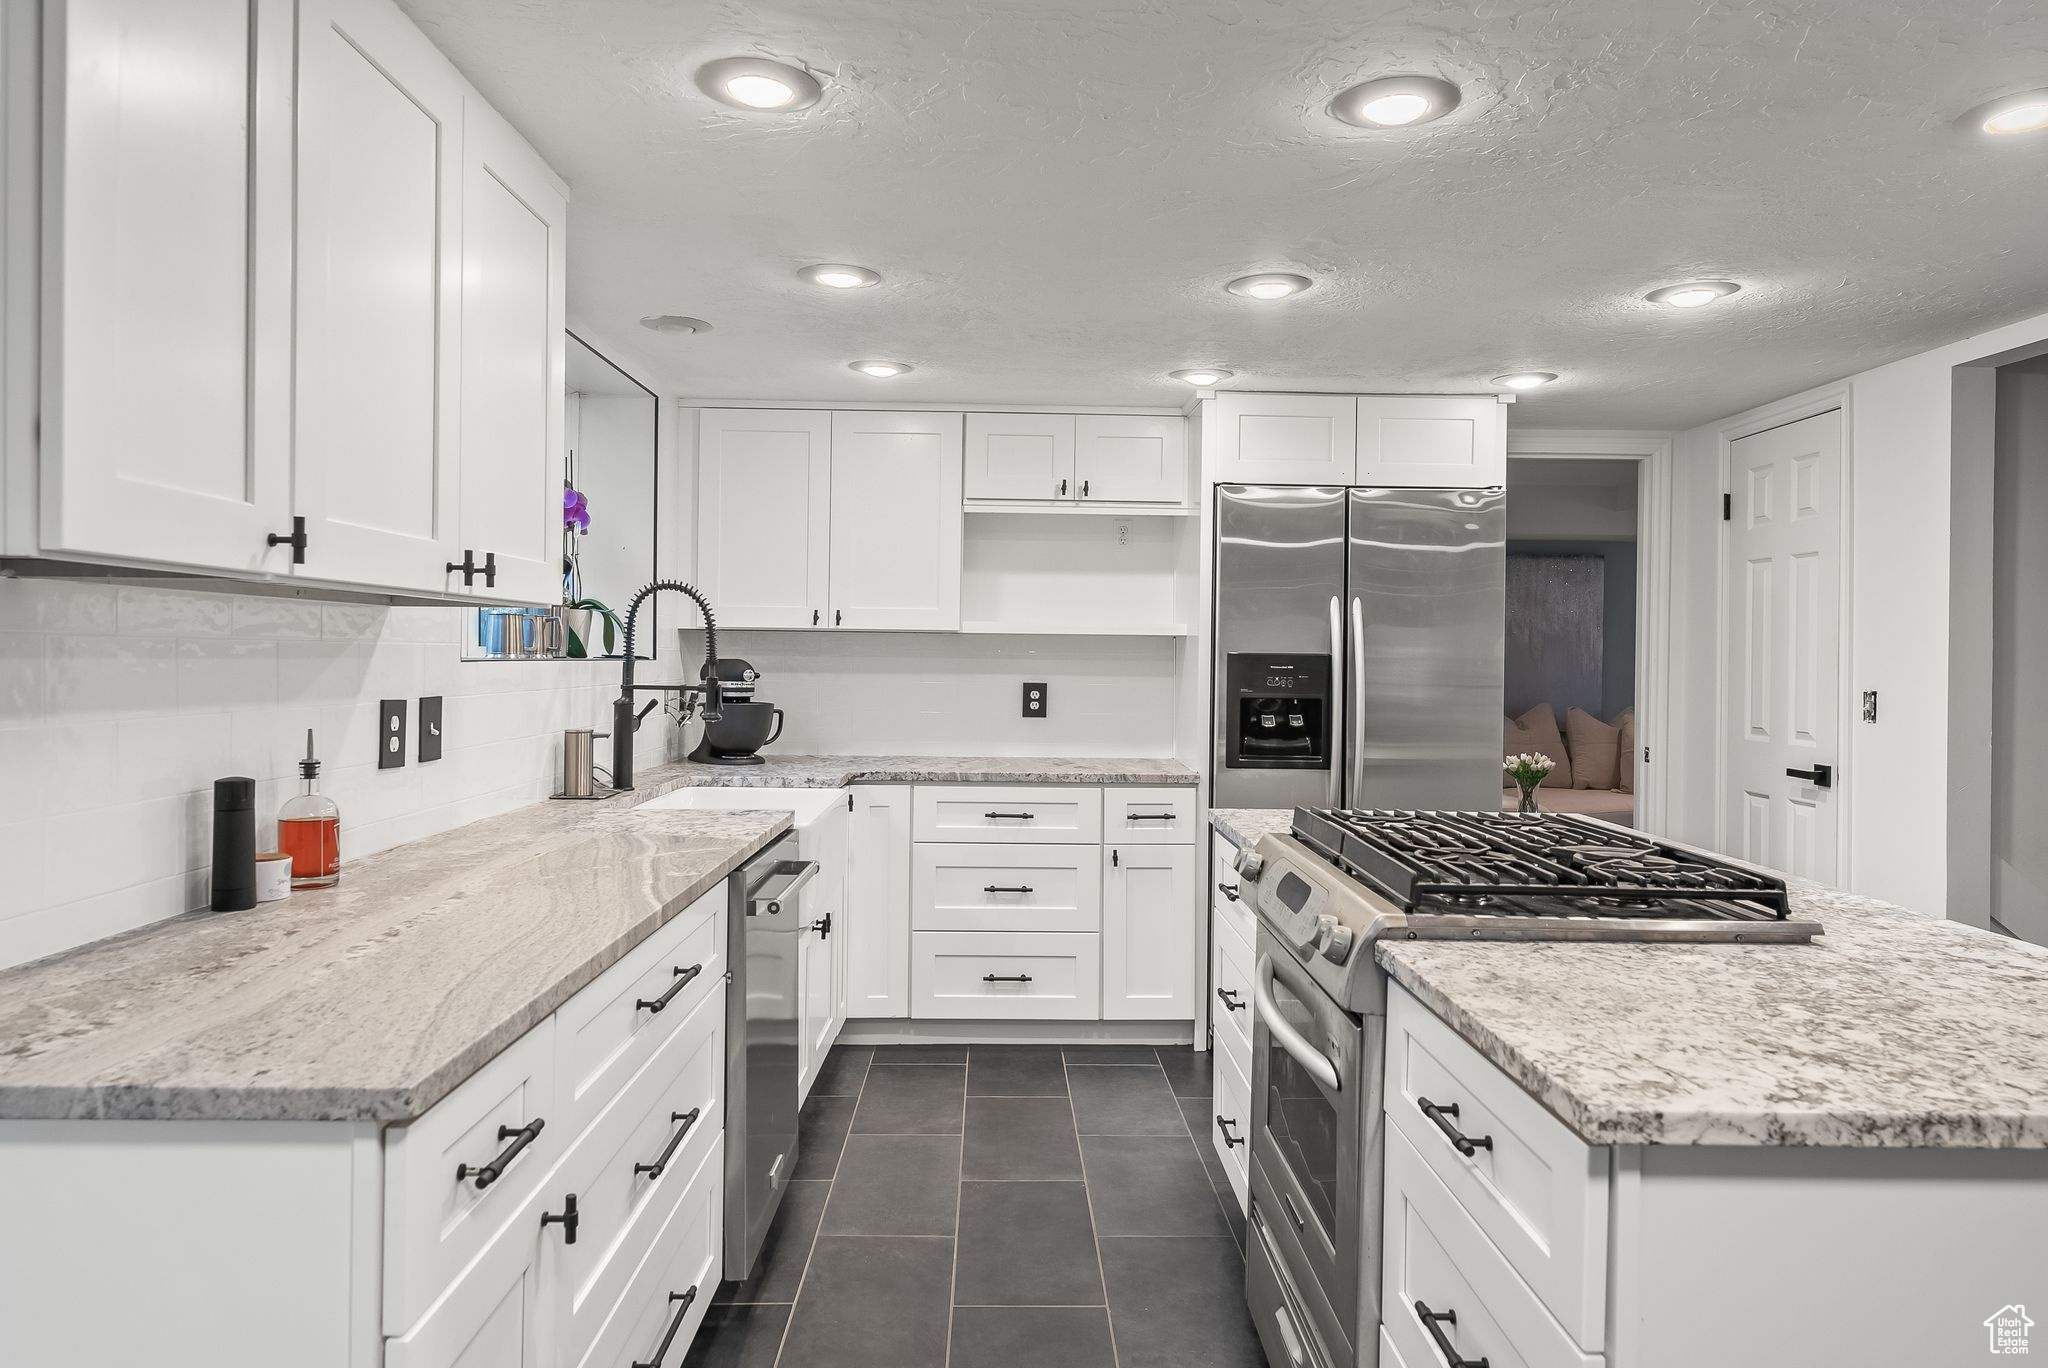 Kitchen featuring light stone countertops, white cabinetry, appliances with stainless steel finishes, tasteful backsplash, and dark tile flooring